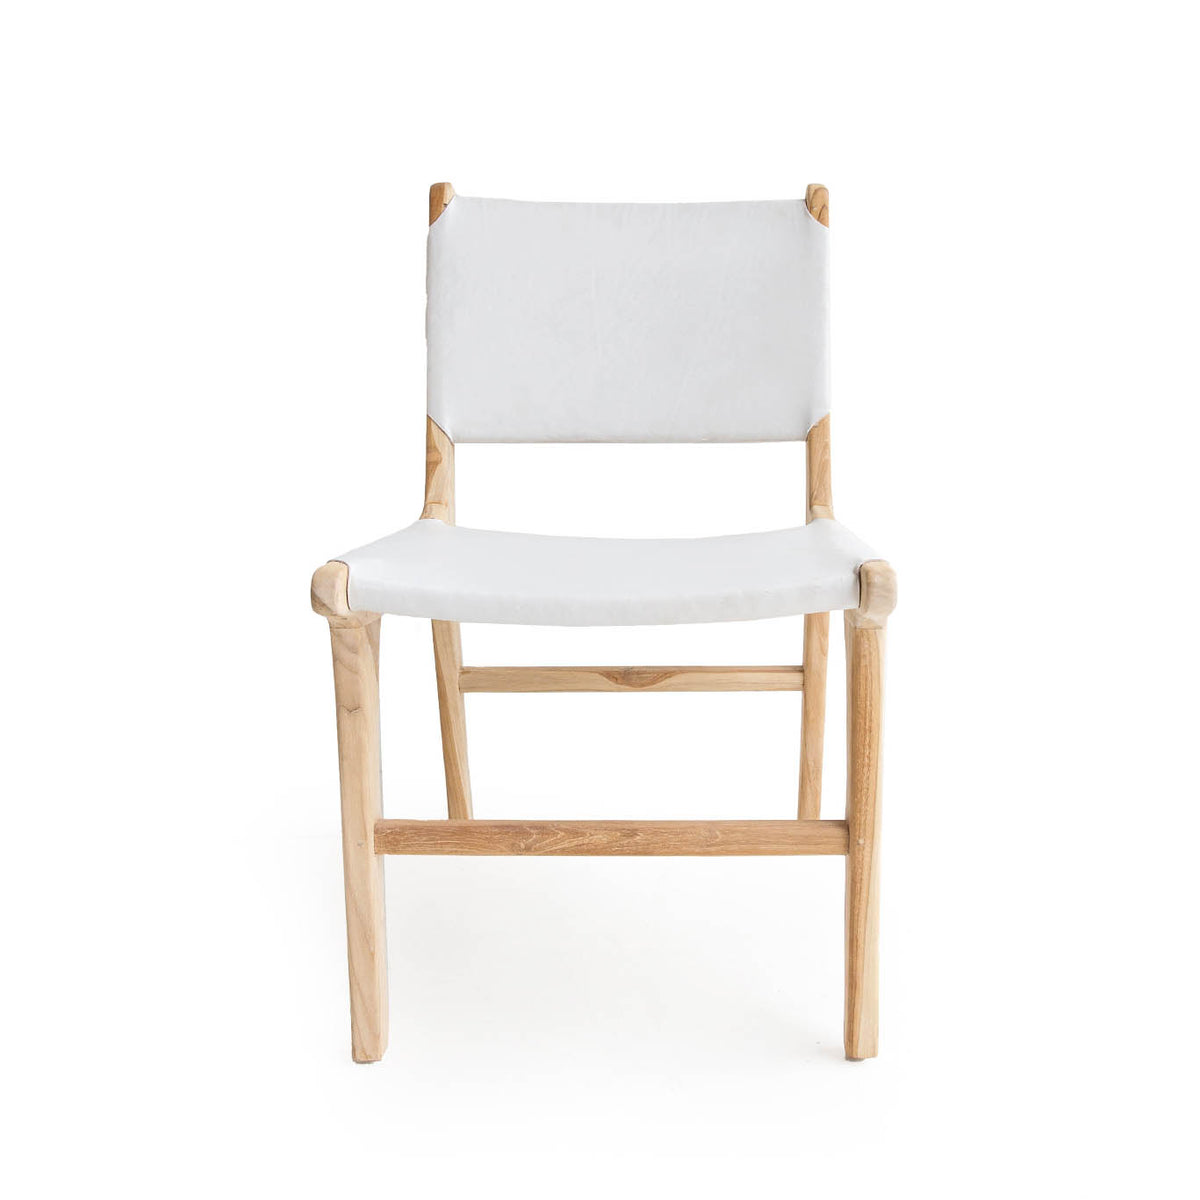 Jubilee Flat Leather Dining Chair - White - Notbrand